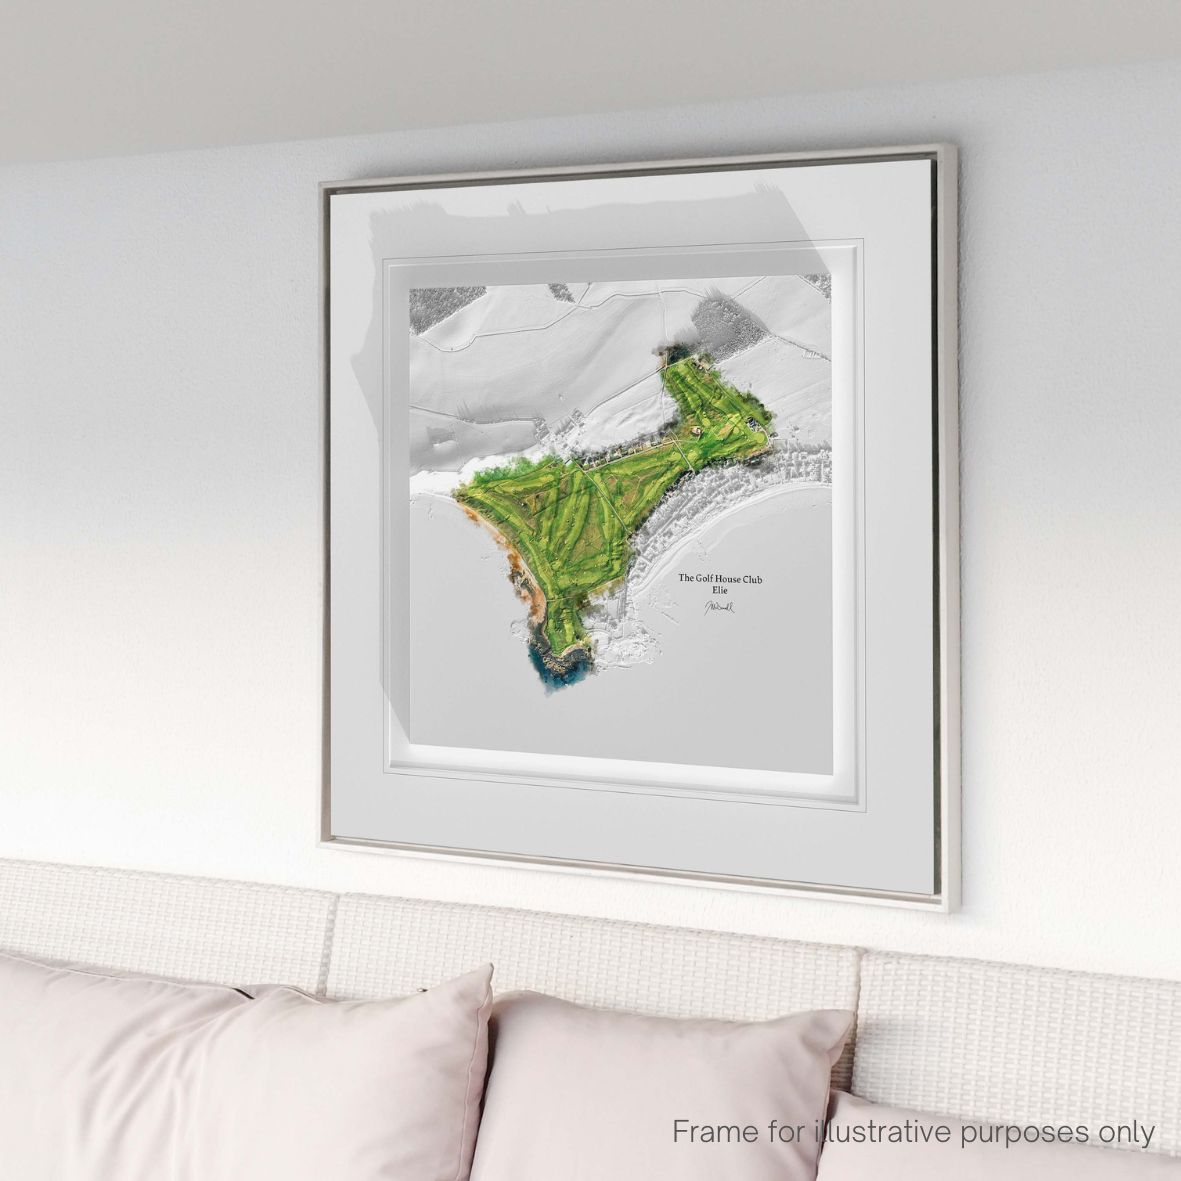 The Golf House Club Elie 3D Print in white frame by Joe McDonnell